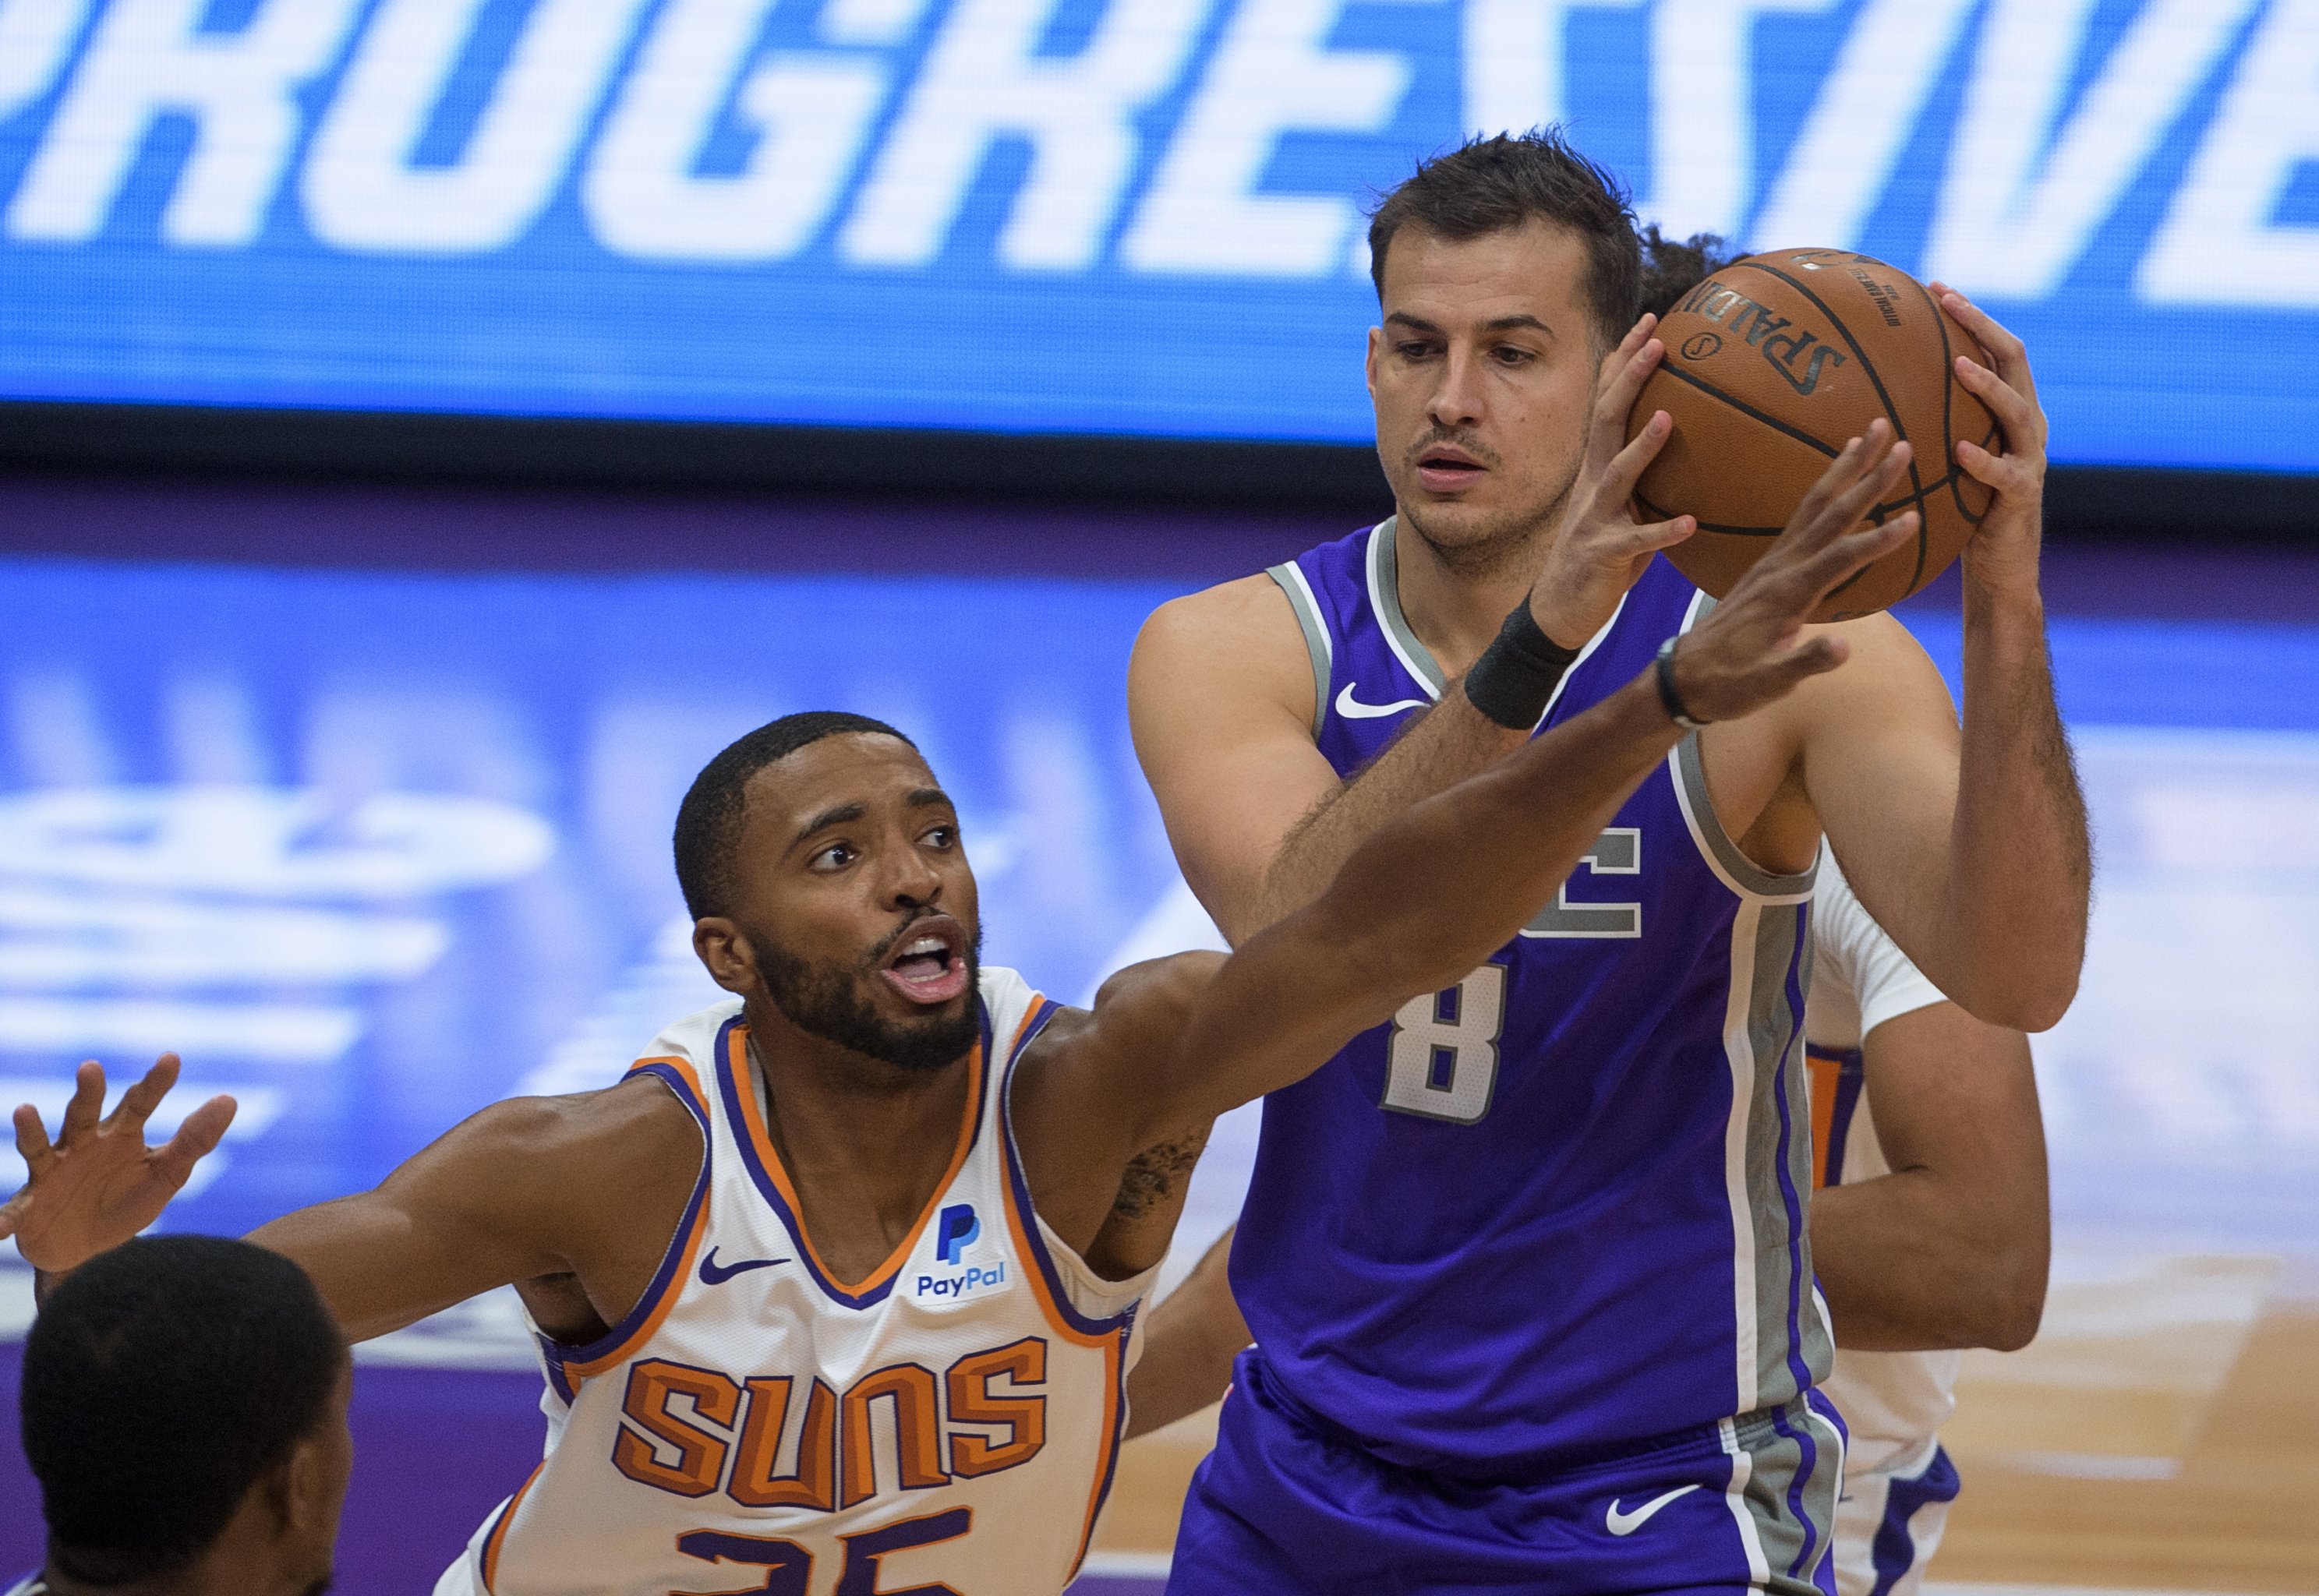 The Suns definitely should inquire about Kemba Walker, but pulling